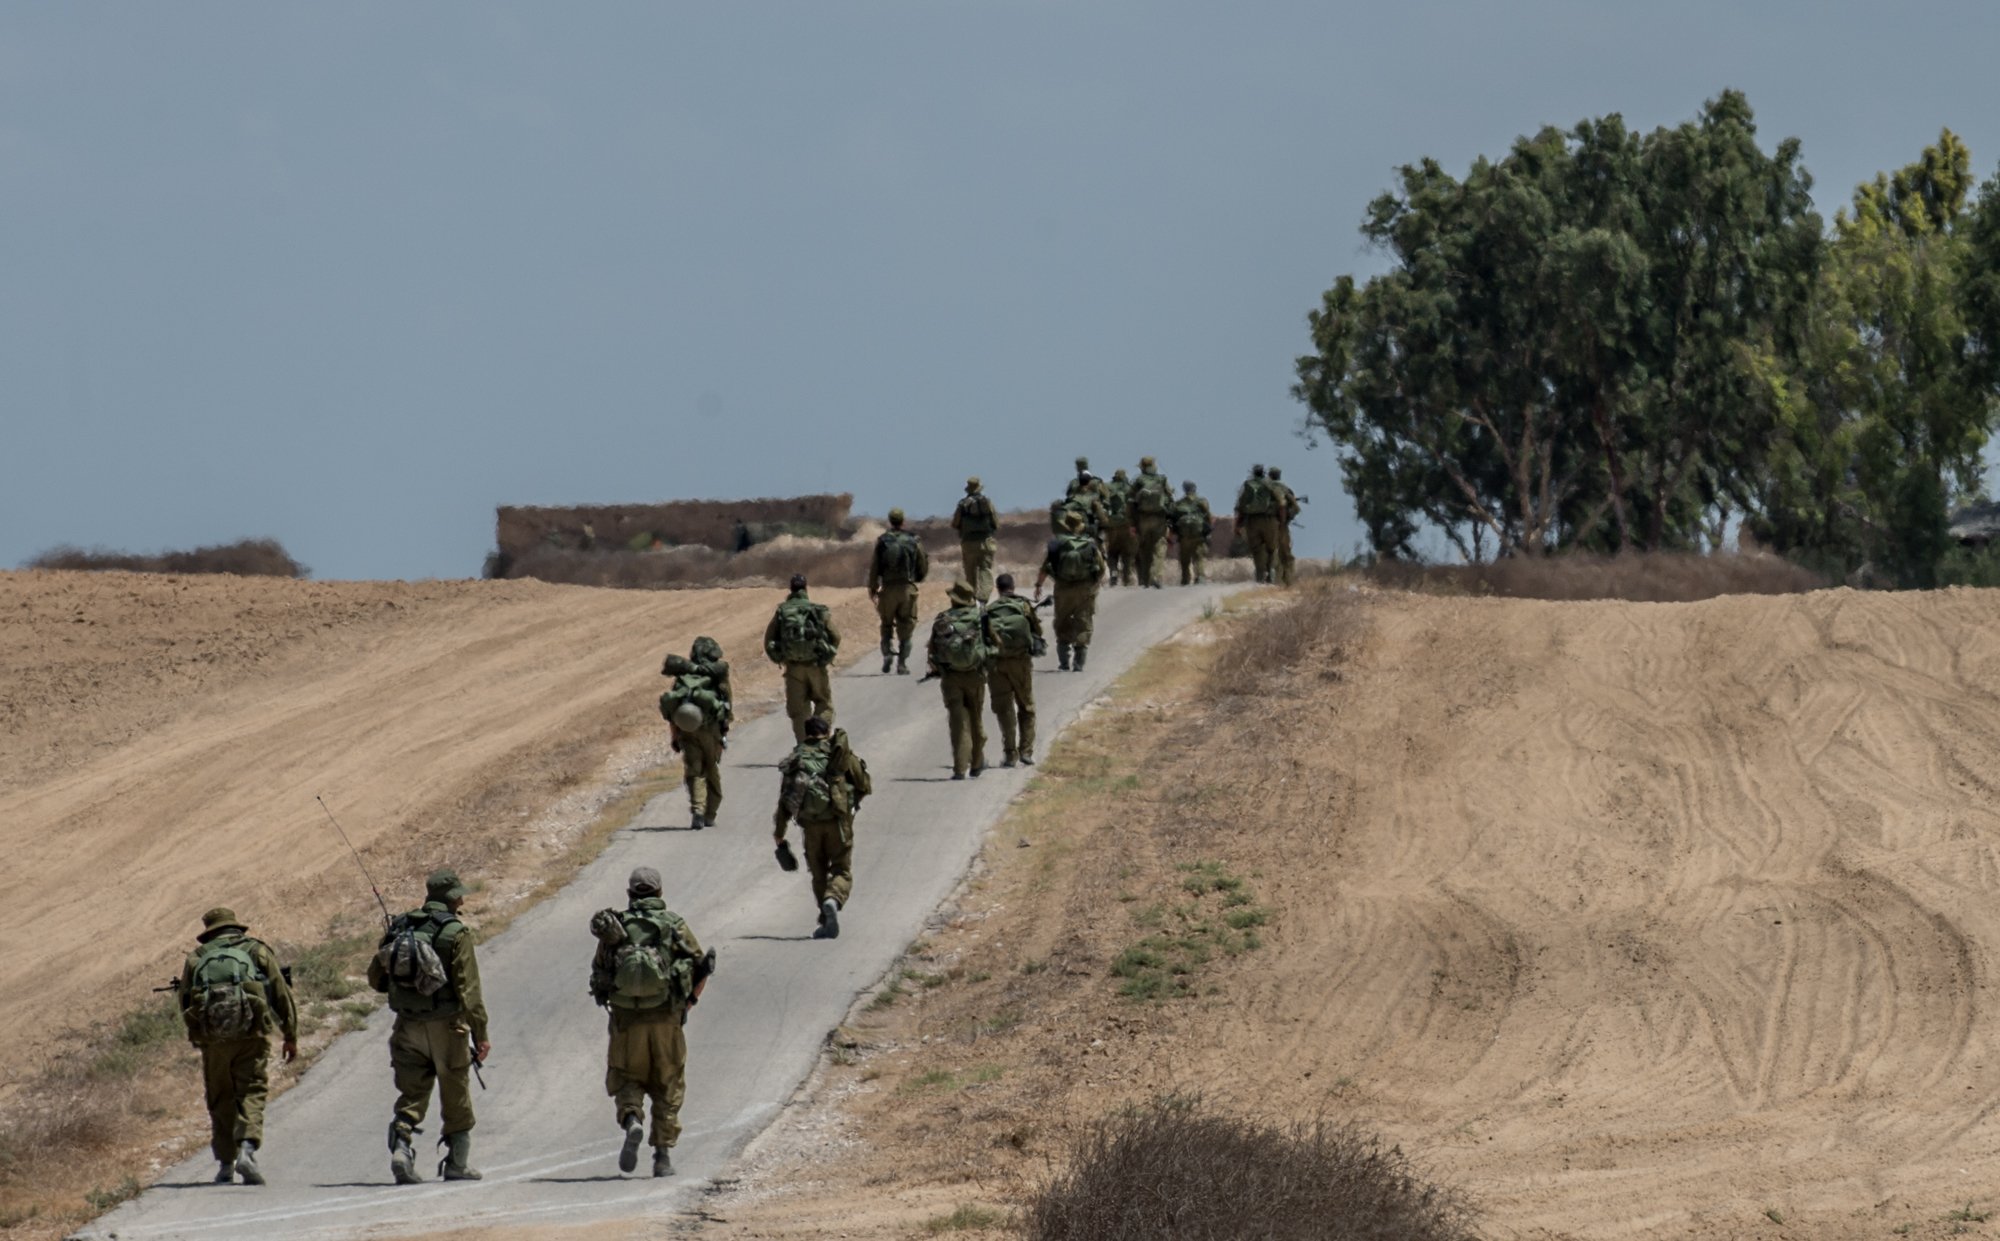 Israeli soldiers march in southern Israel near the border with Gaza, on July 18, 2014, the 11th day of Operation Protective Edge. (Xinhua—Sipa)